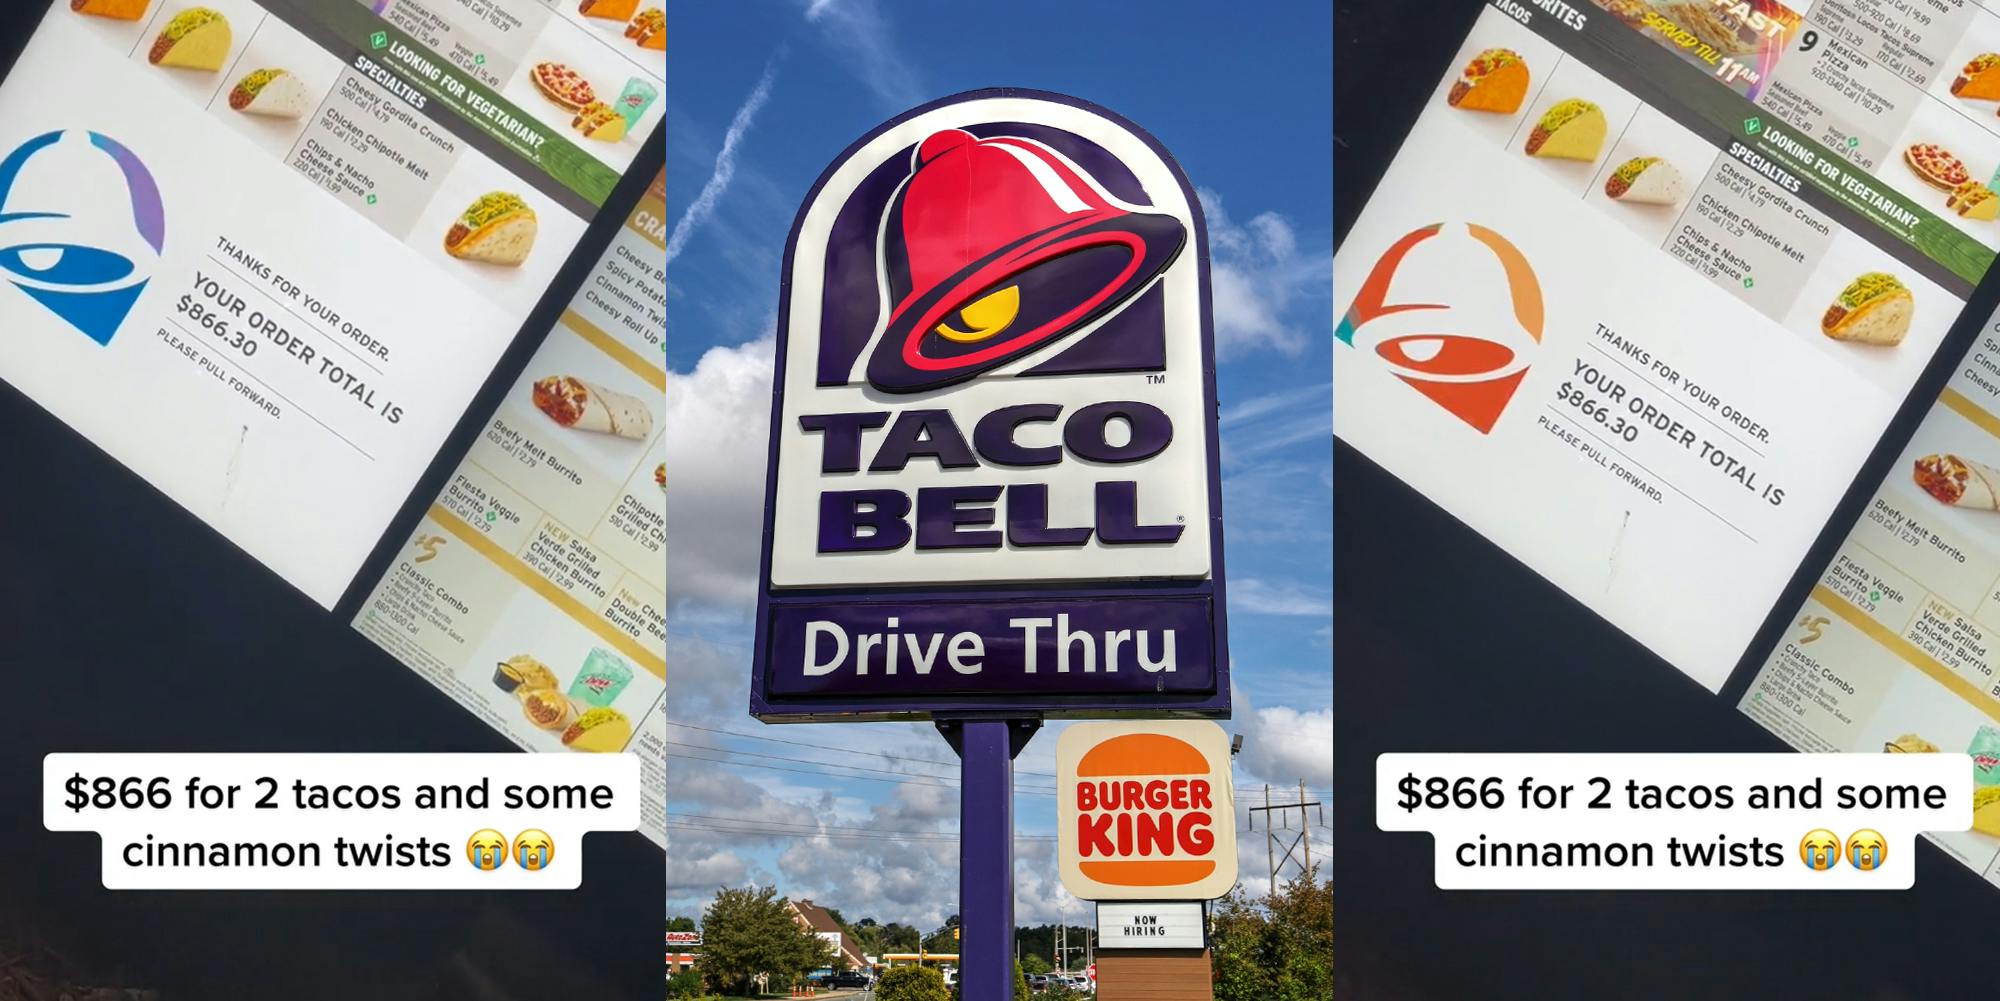 Taco Bell drive thru menu with screen displaying "YOUR ORDER TOTAL IS $866.30" with caption "$866 for 2 tacos and some cinnamon twists" (l) Taco Bell drive thru sign outside with blue sky (c) Taco Bell drive thru menu with screen displaying "YOUR ORDER TOTAL IS $866.30" with caption "$866 for 2 tacos and some cinnamon twists" (r)